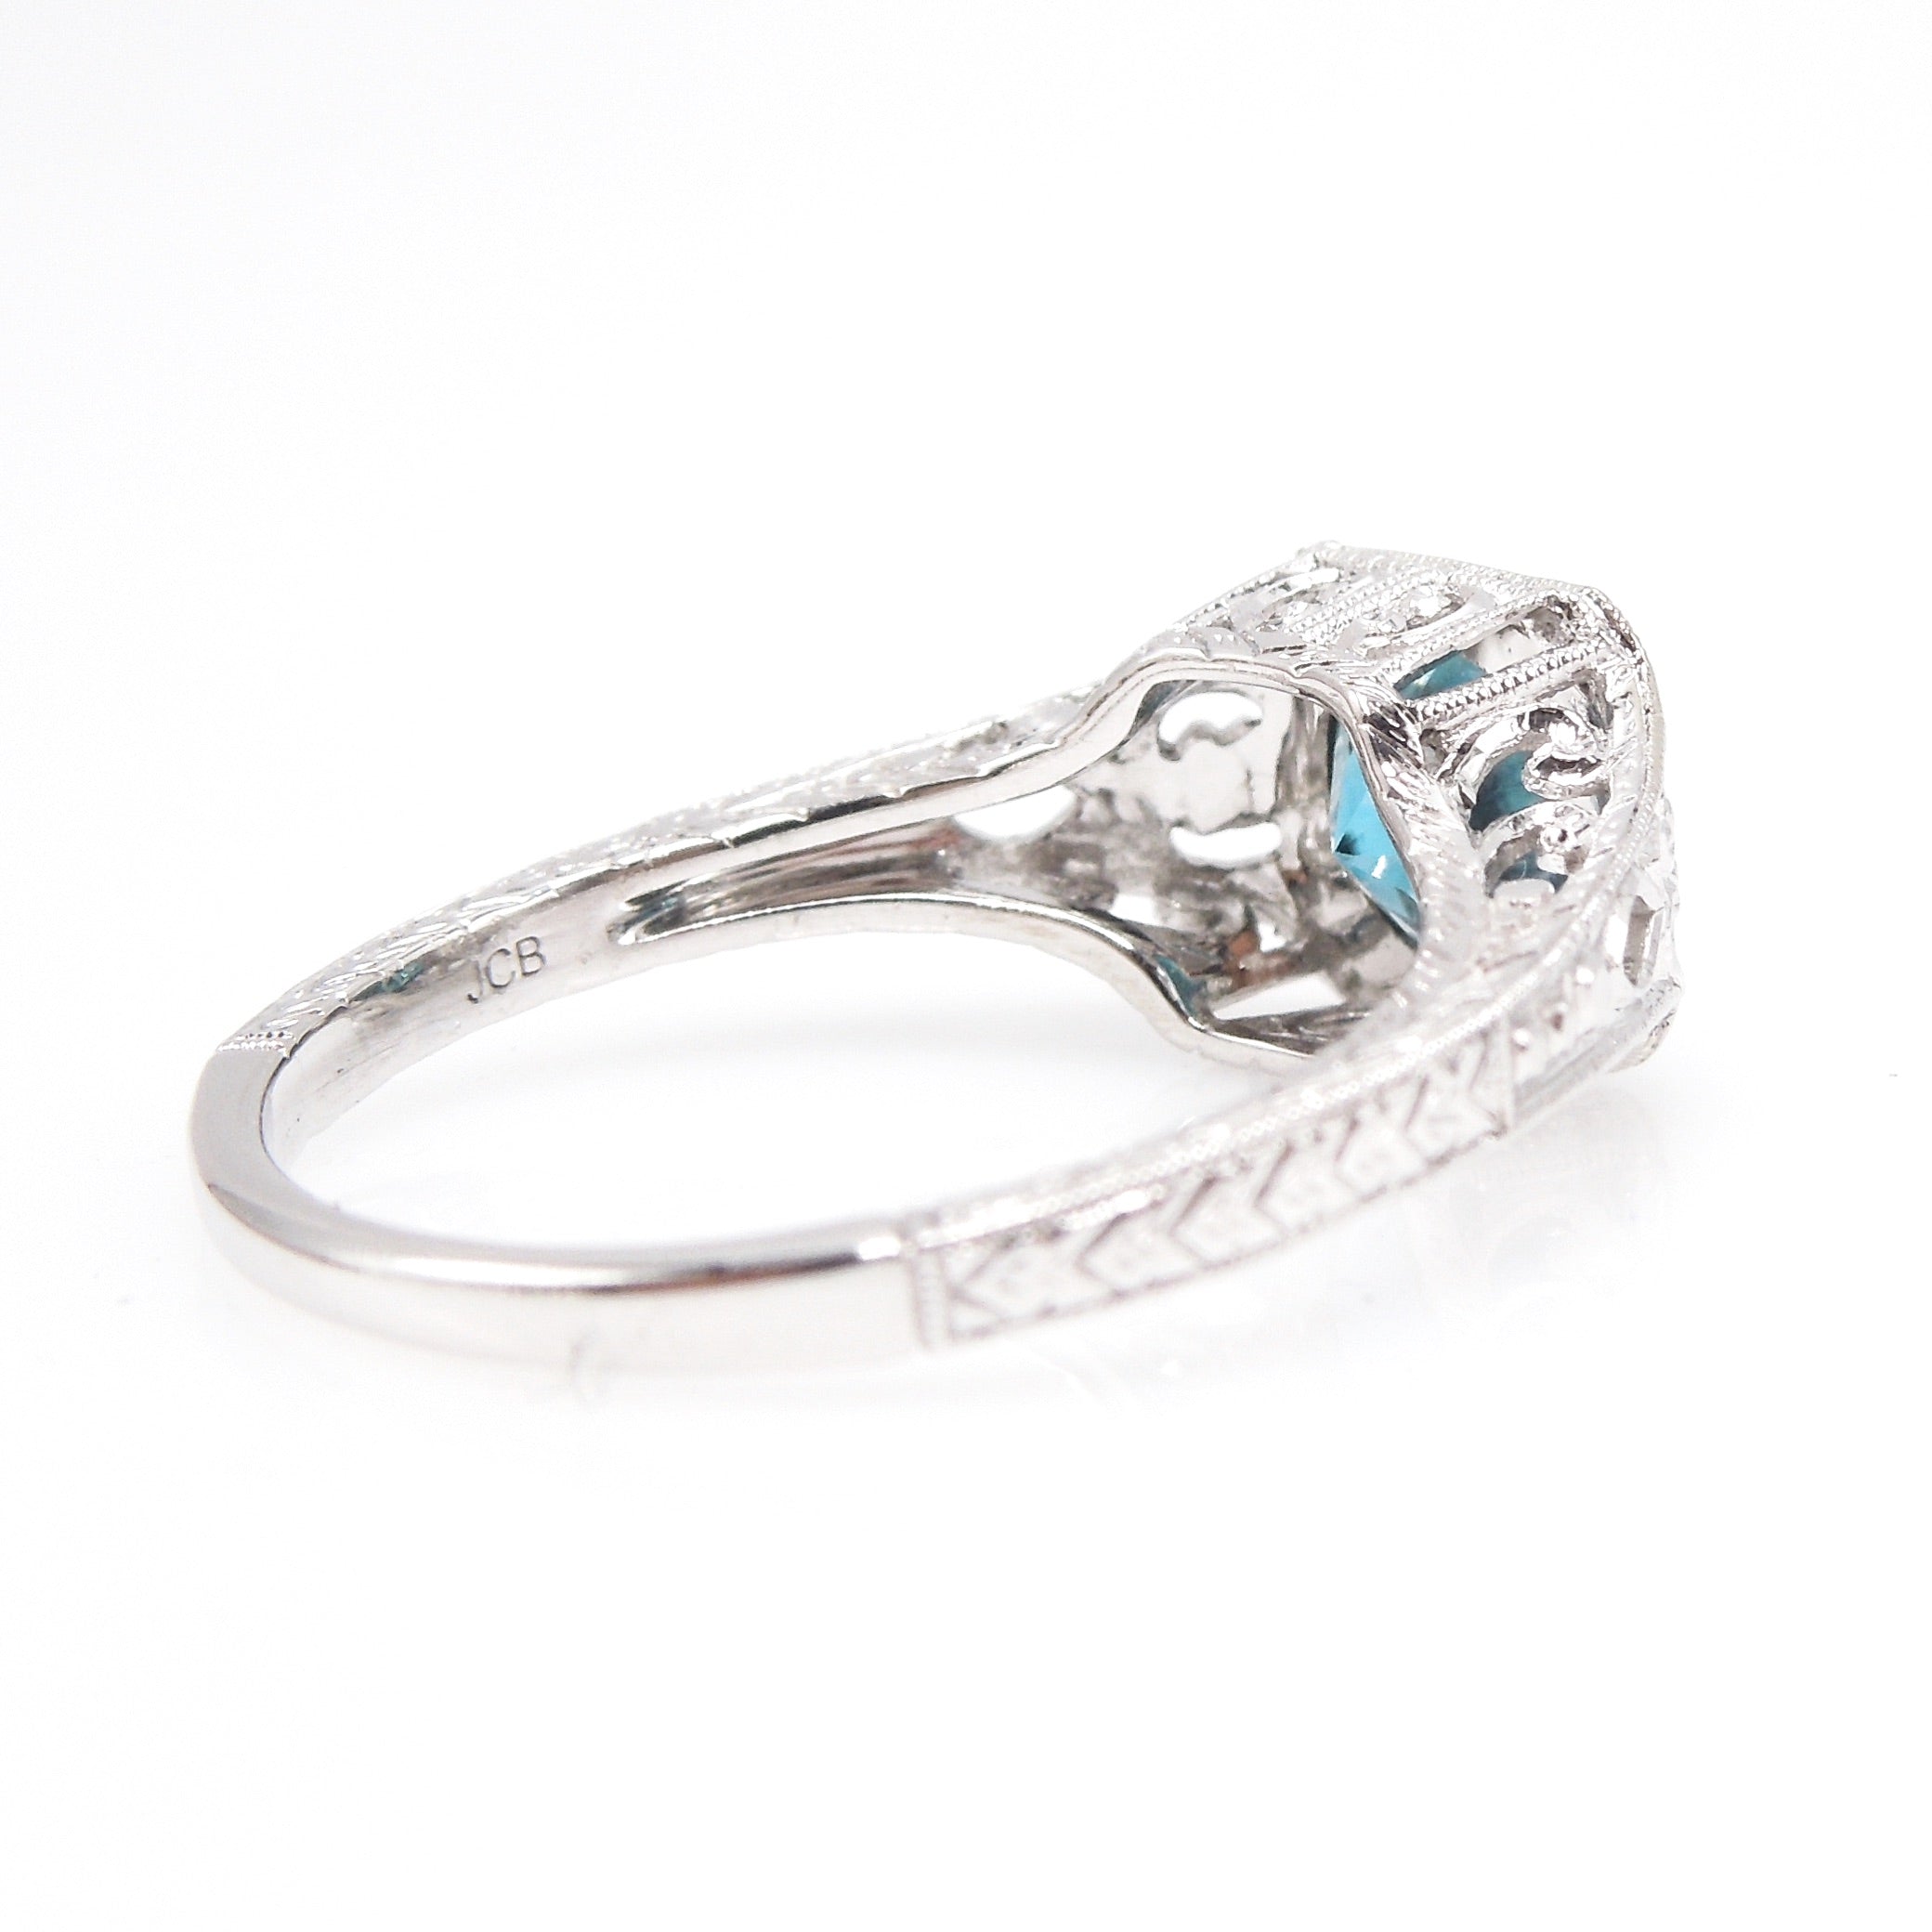 Filigreed Art Deco Style Ring in White Gold with 1.66ct Blue Zircon